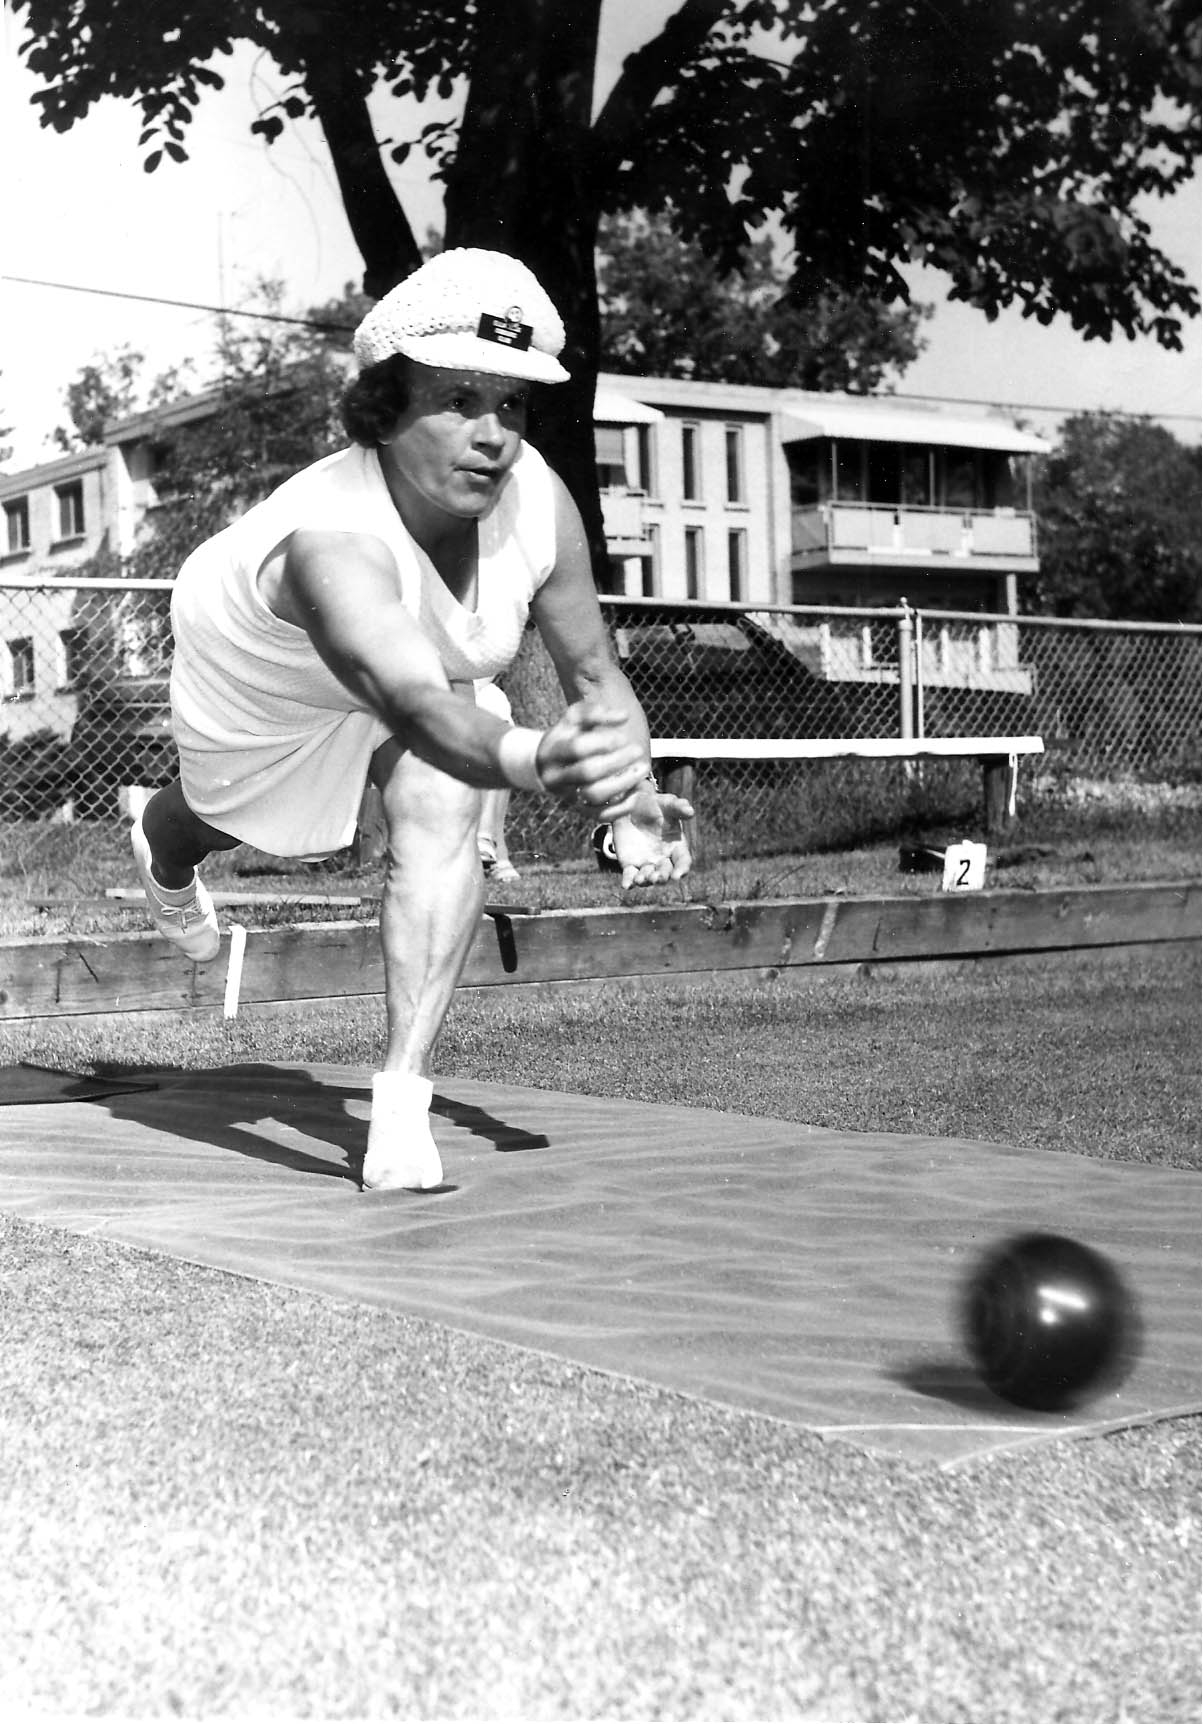 No. 162 - The Lawnbowler